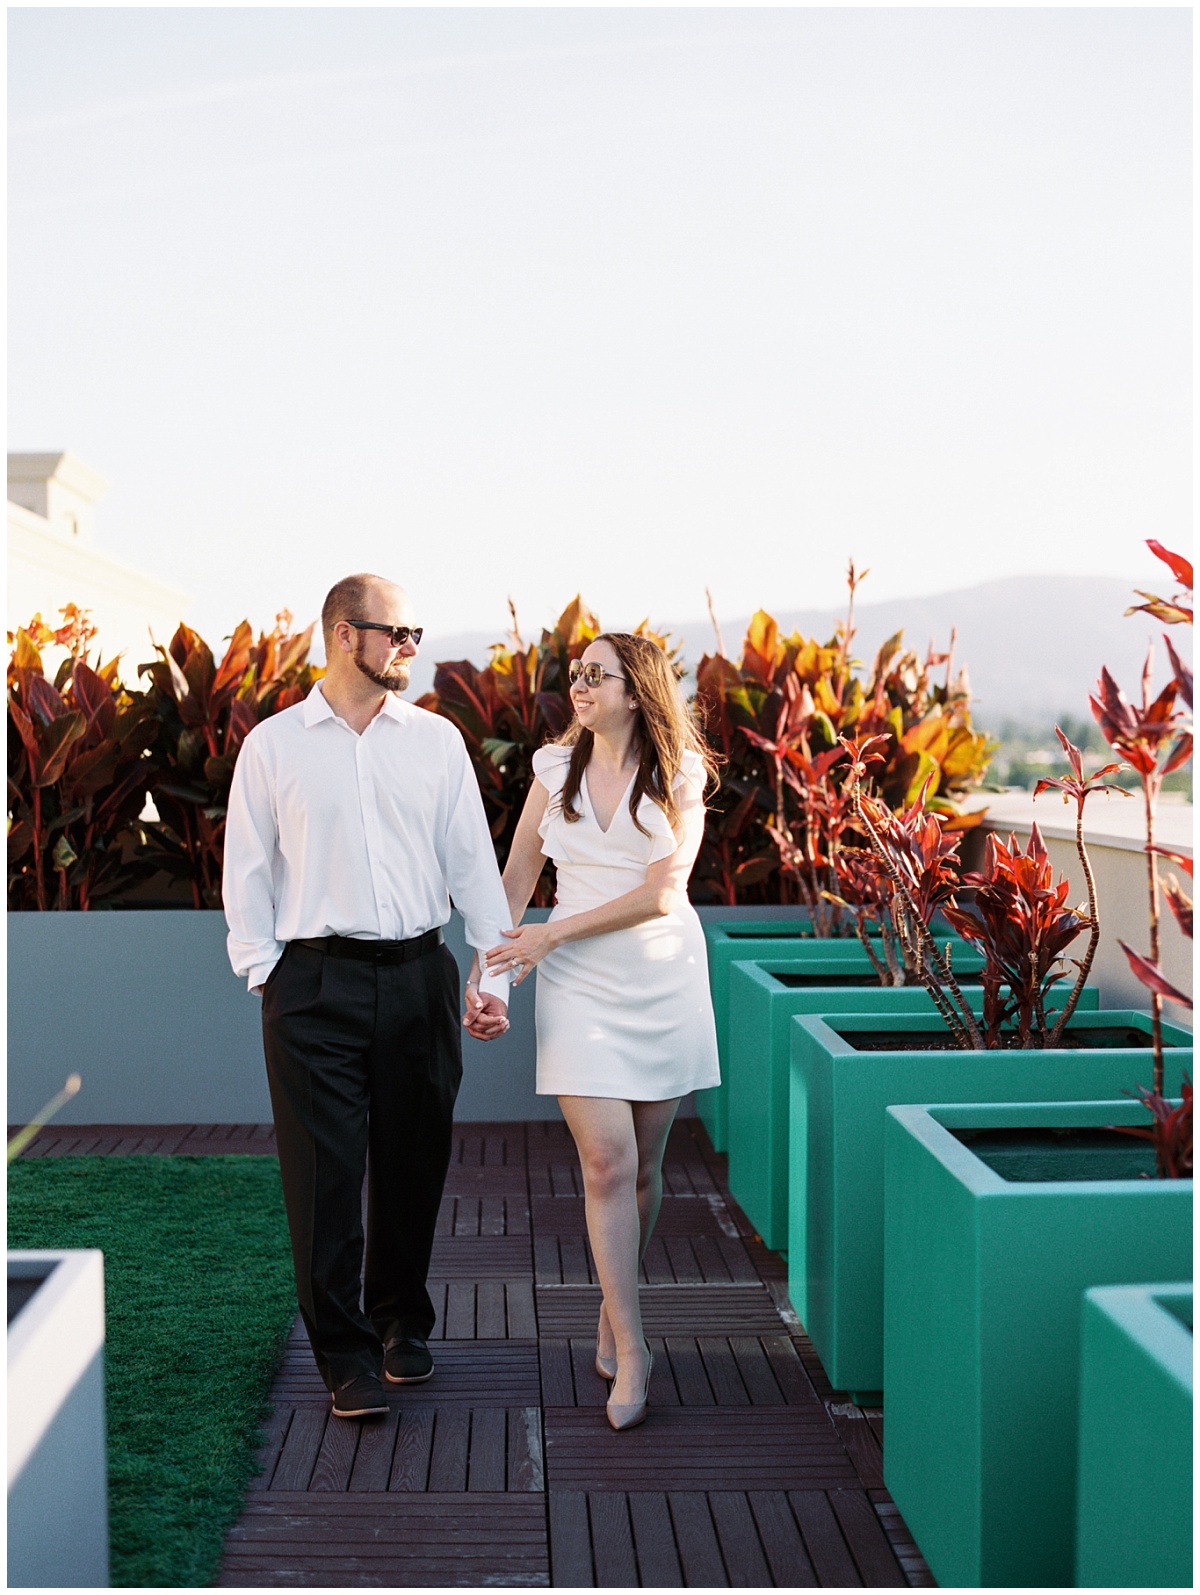 Rooftop Engagement Session